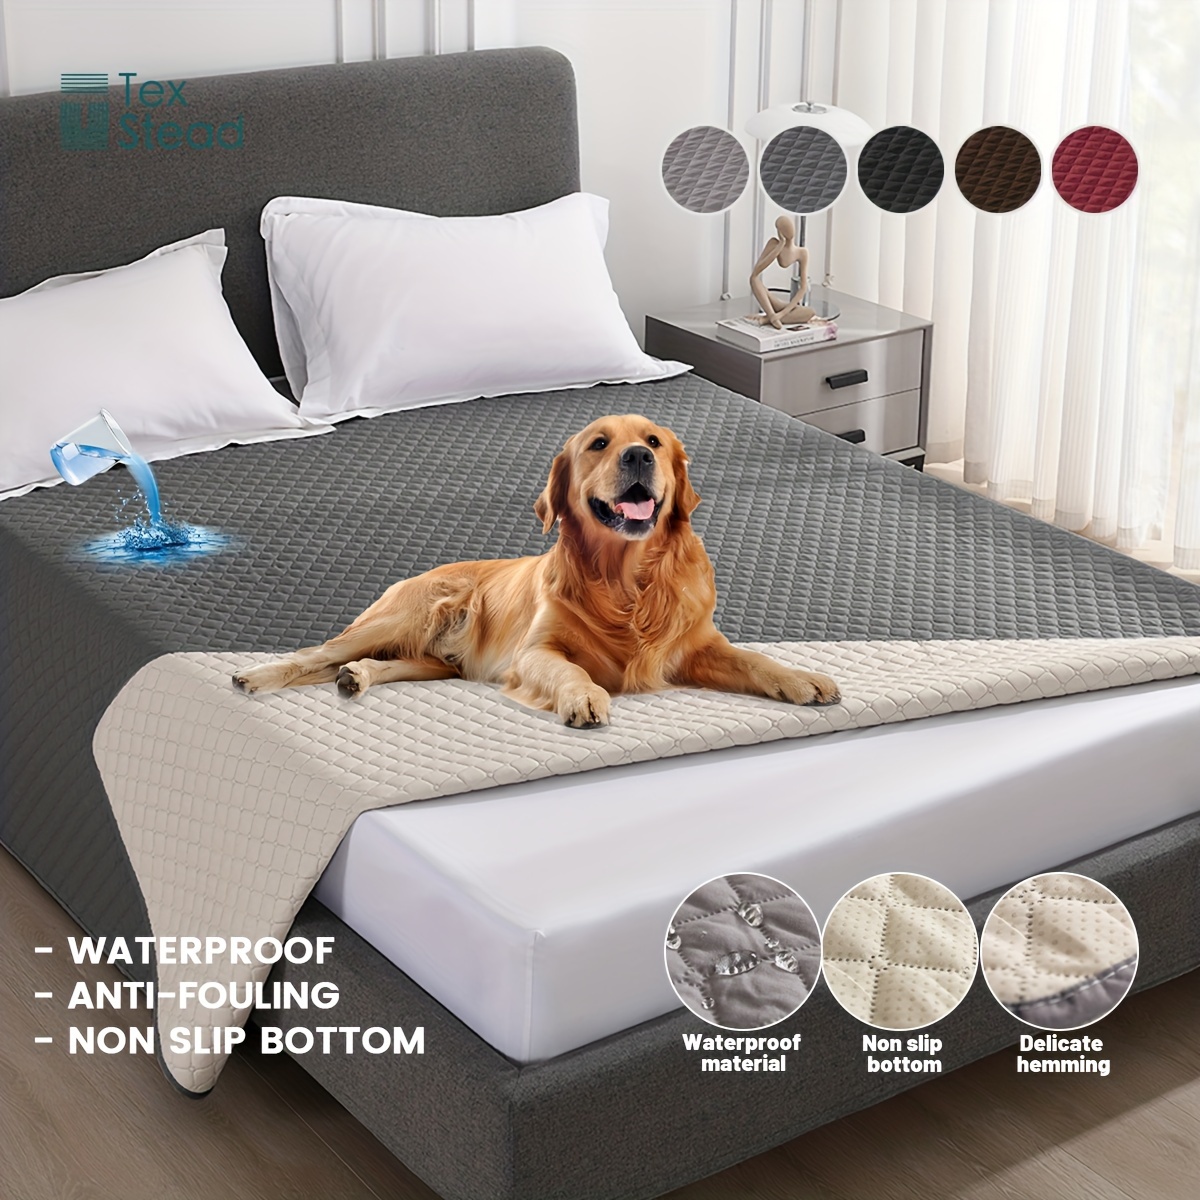 

Waterproof & Non-slip Dog Bed Cover Mattress Cover And Pet Blanket Sofa Pet Bed Mat, Car Incontinence Mattress Protectors Furniture Couch Cover For Most Cats Dogs